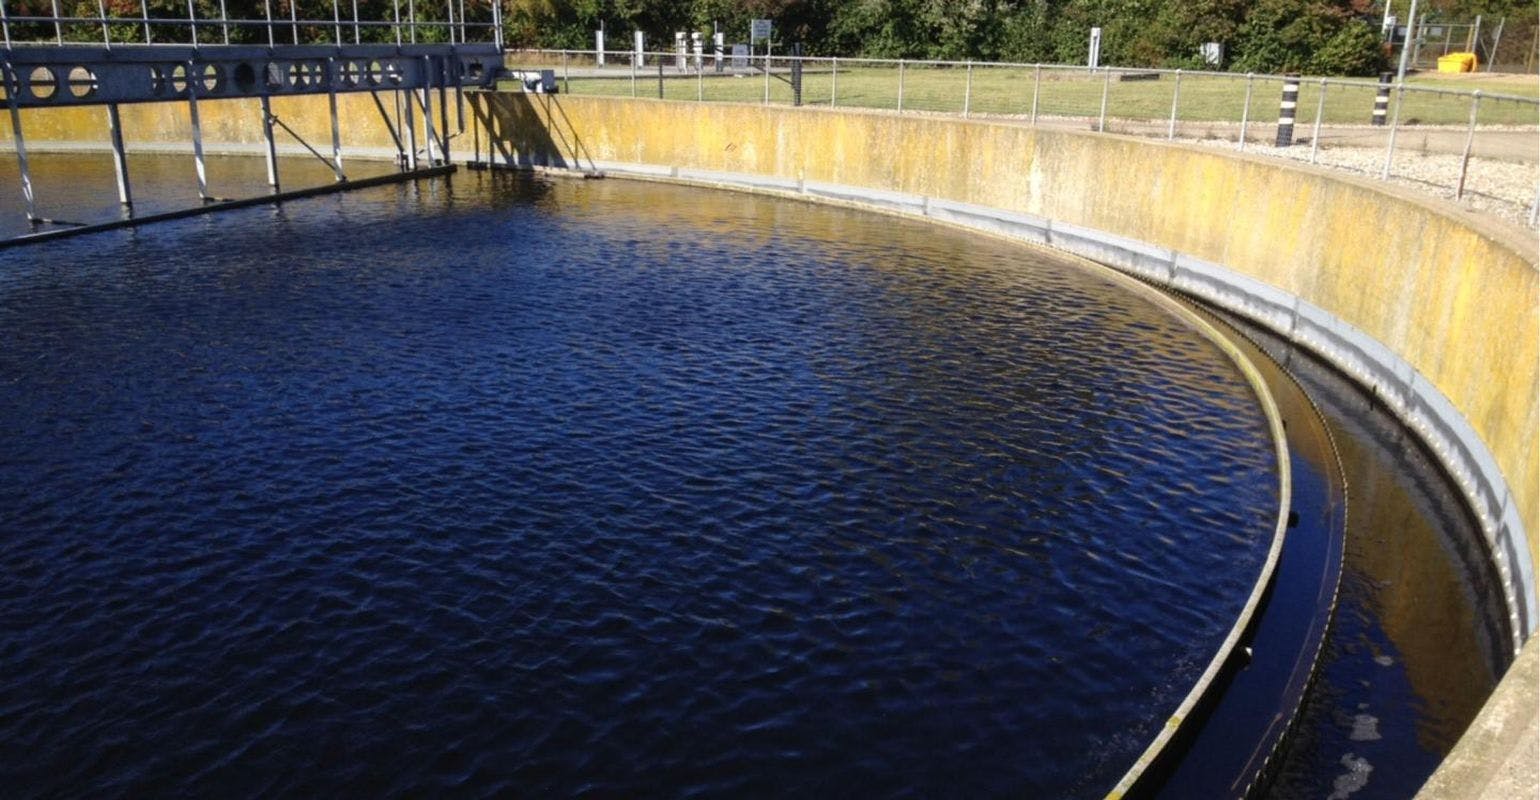 Pathogenic Bacteria Found in Wastewater Treatment Plants